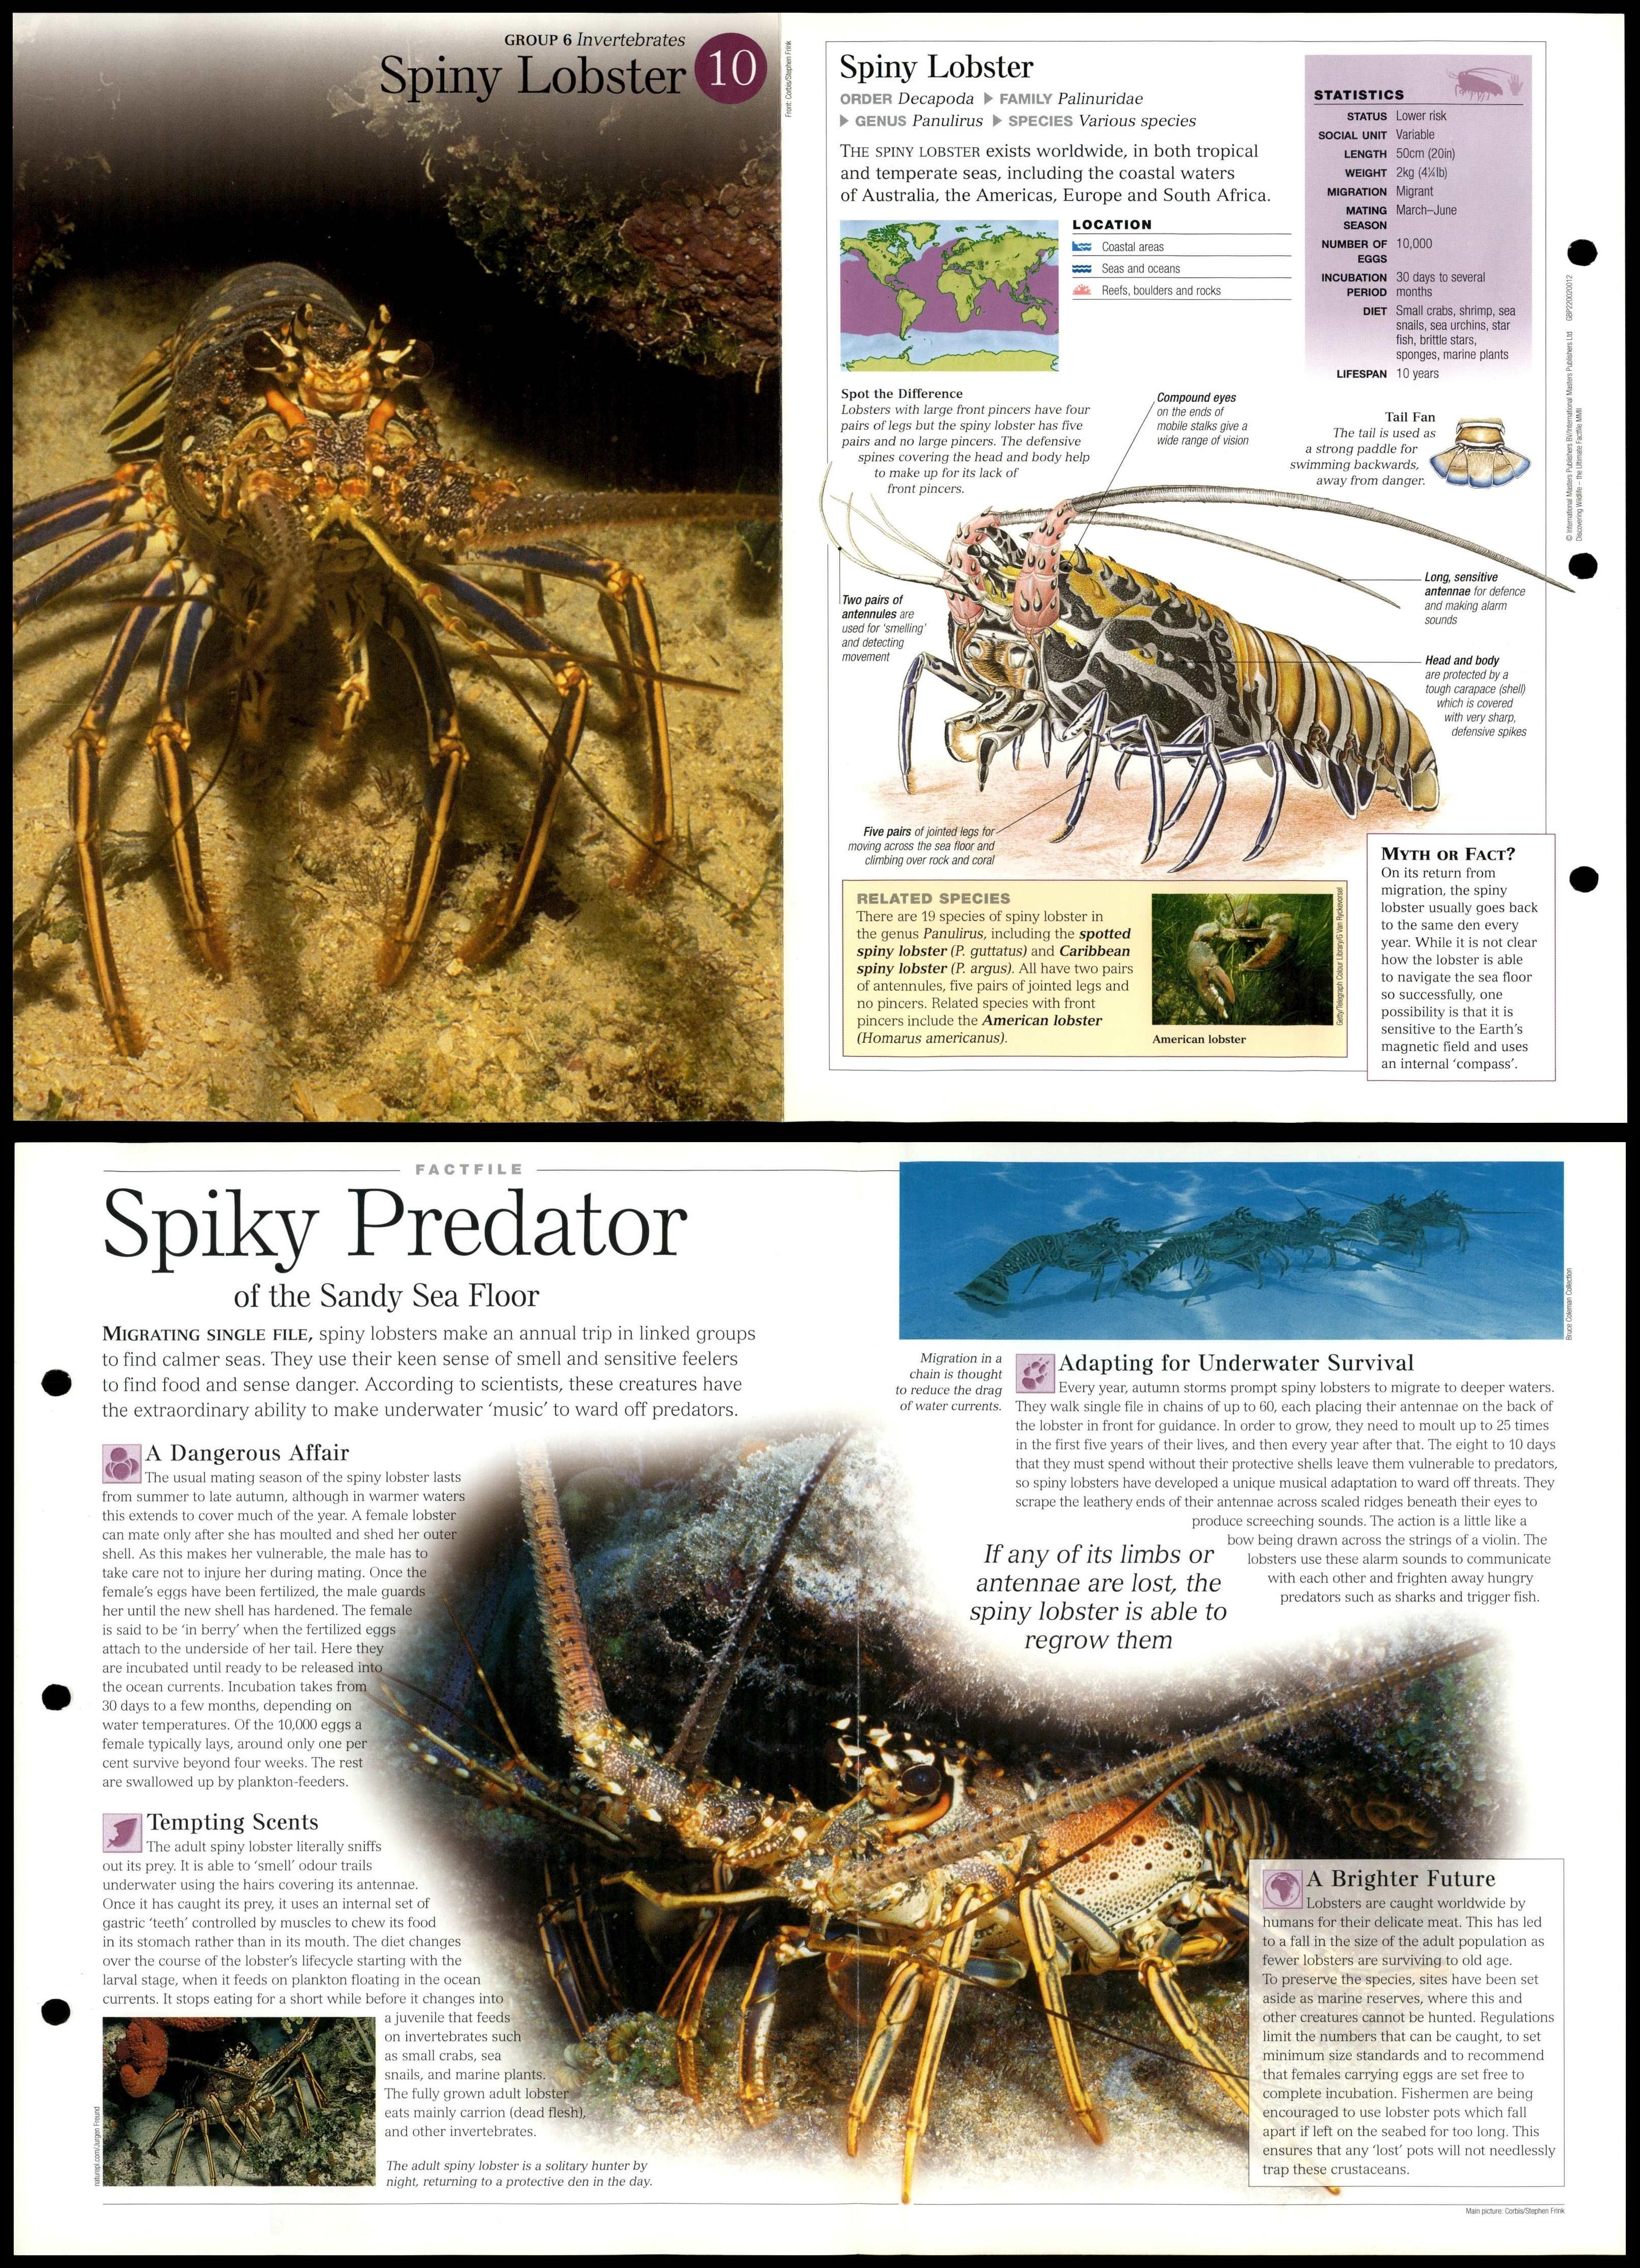 Spiny Lobster #10 Invertebrates - Discovering Wildlife Fact File Fold-Out  Card